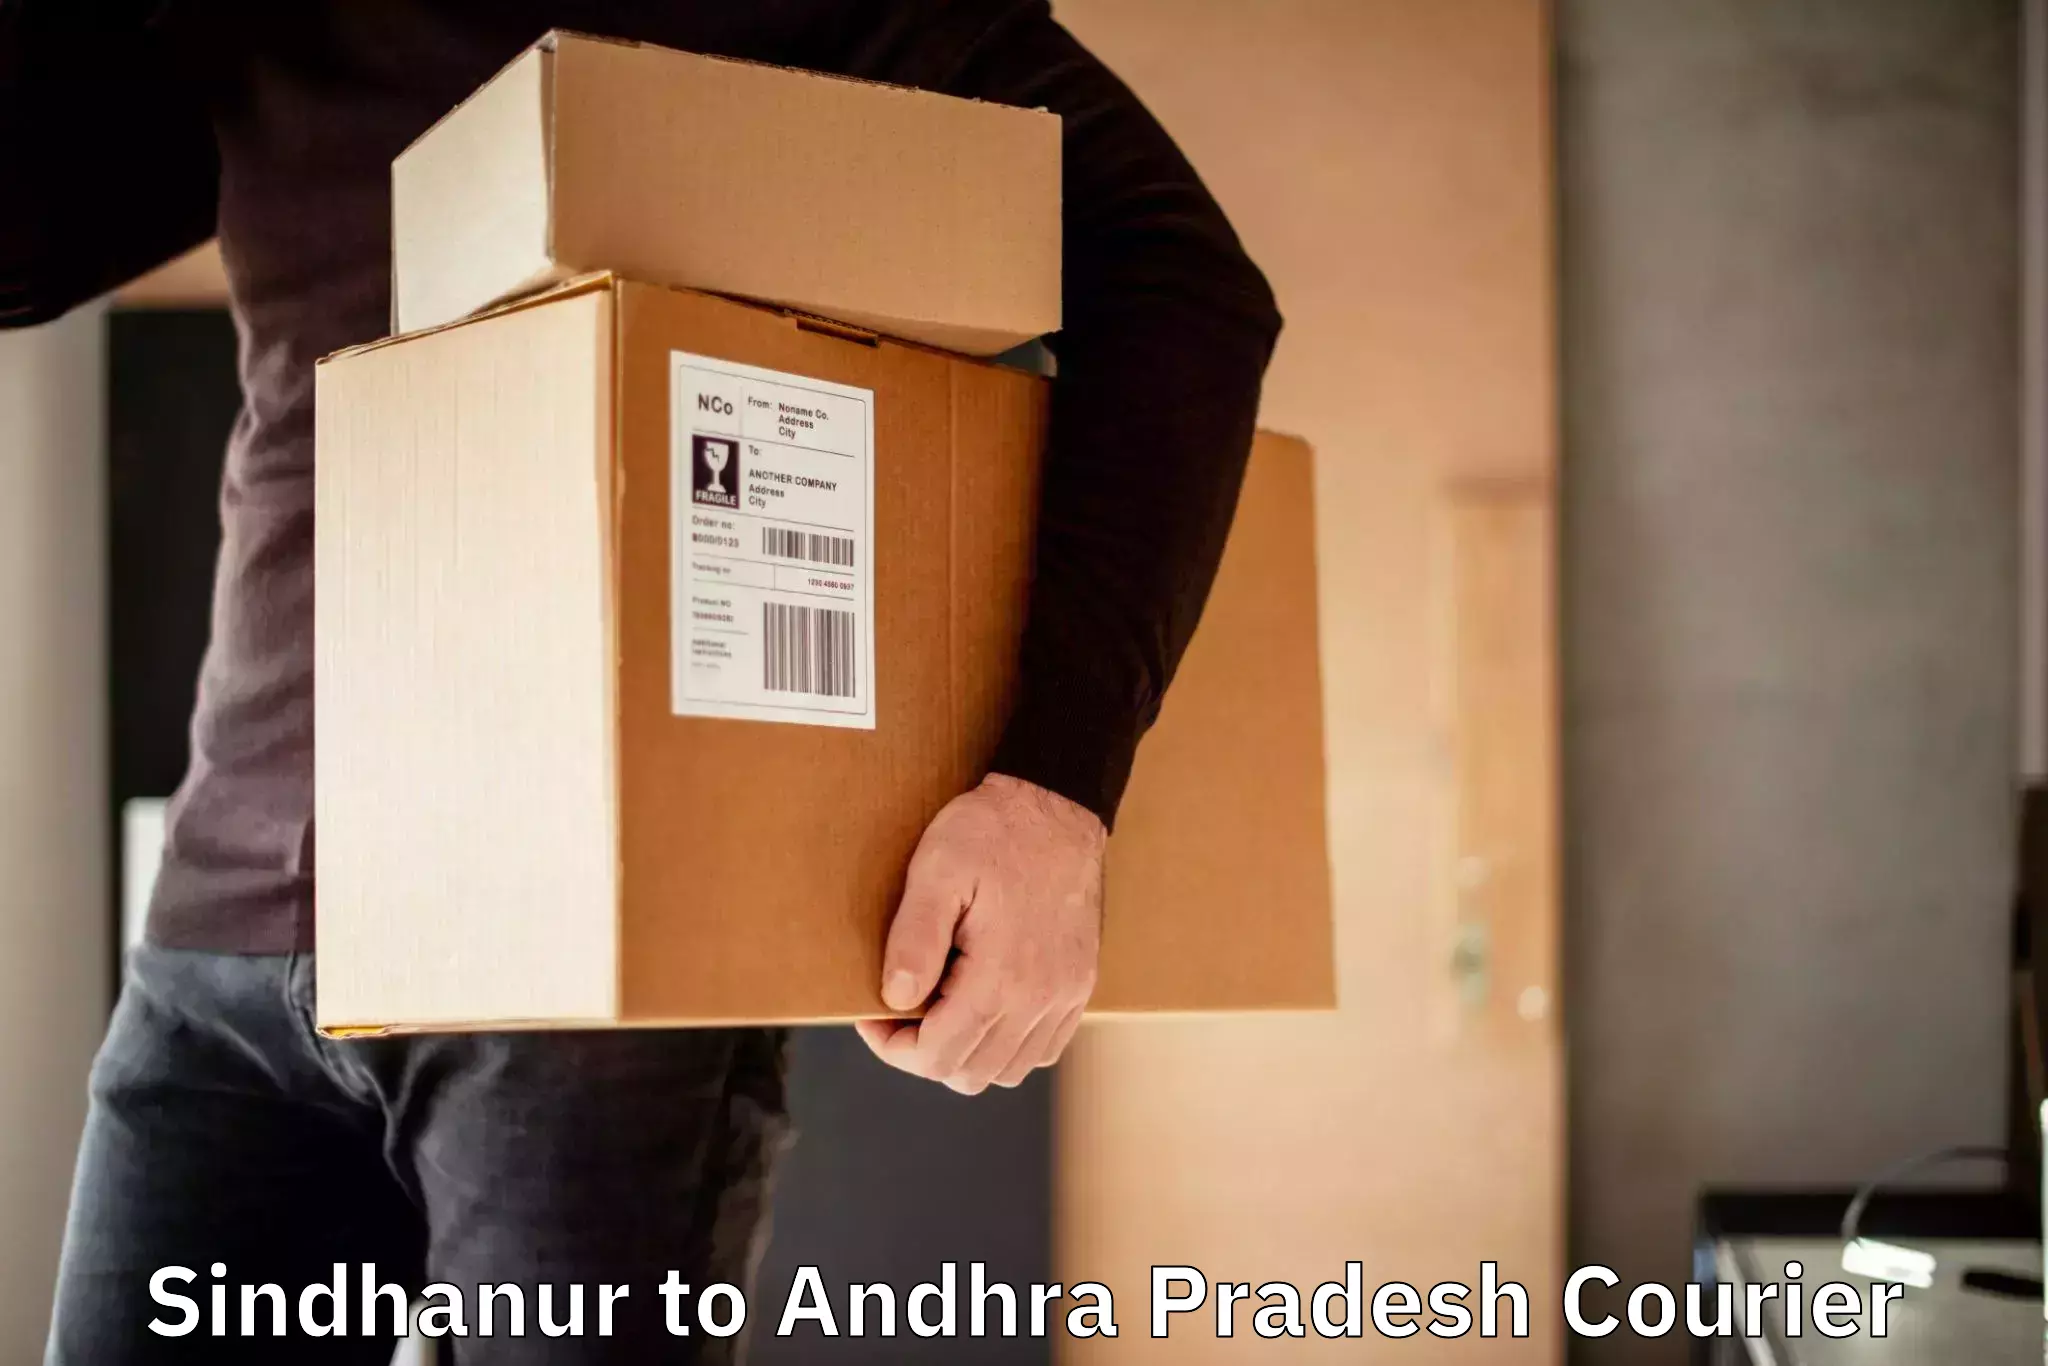 On-call courier service Sindhanur to Naidupeta